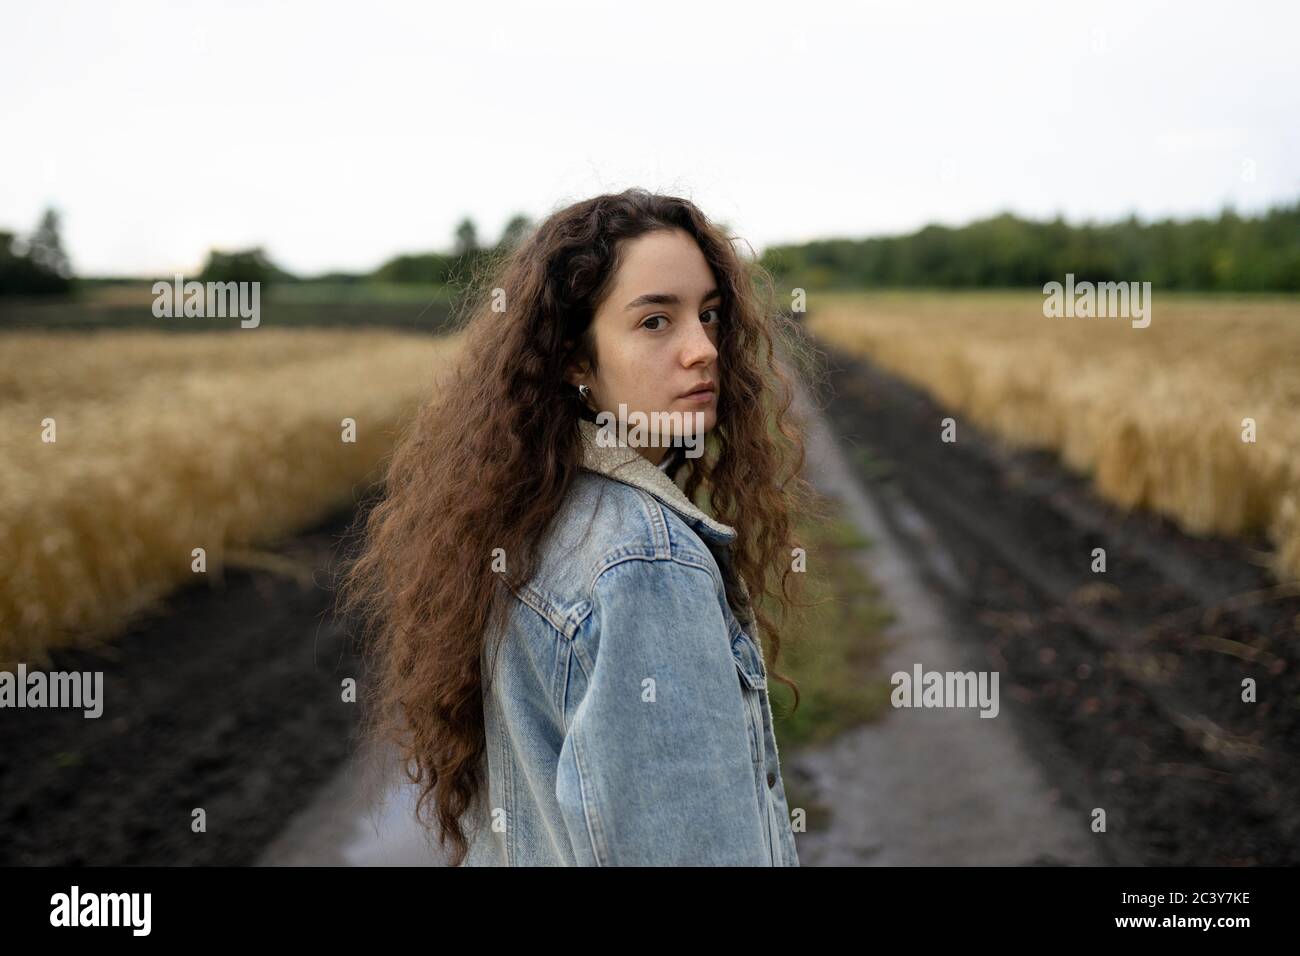 Russia, Omsk, Portrait of young woman with brown hair standing in field Stock Photo